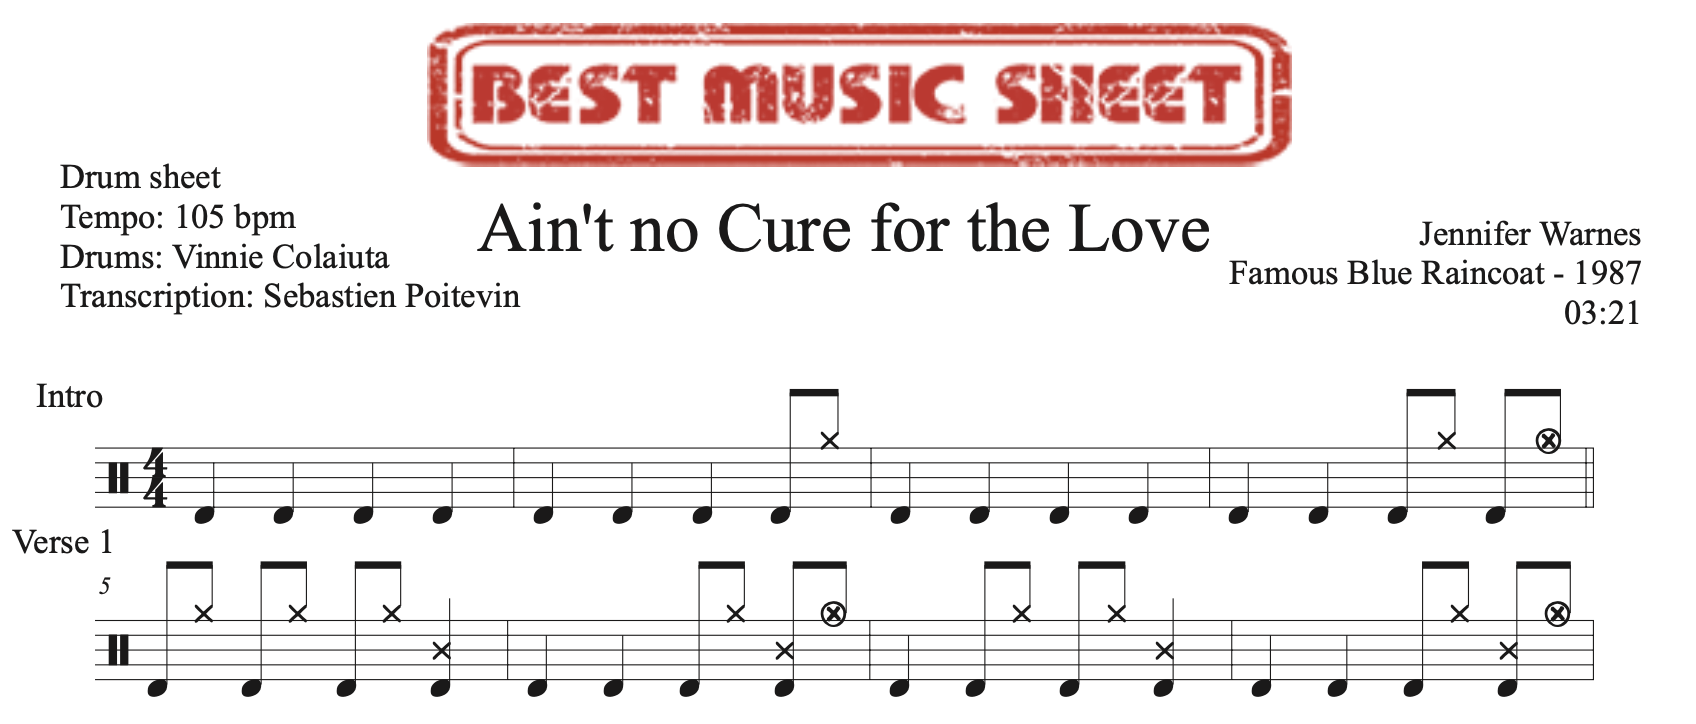 Sample drum sheet of Ain't No Cure For Love by Jennifer Warnes